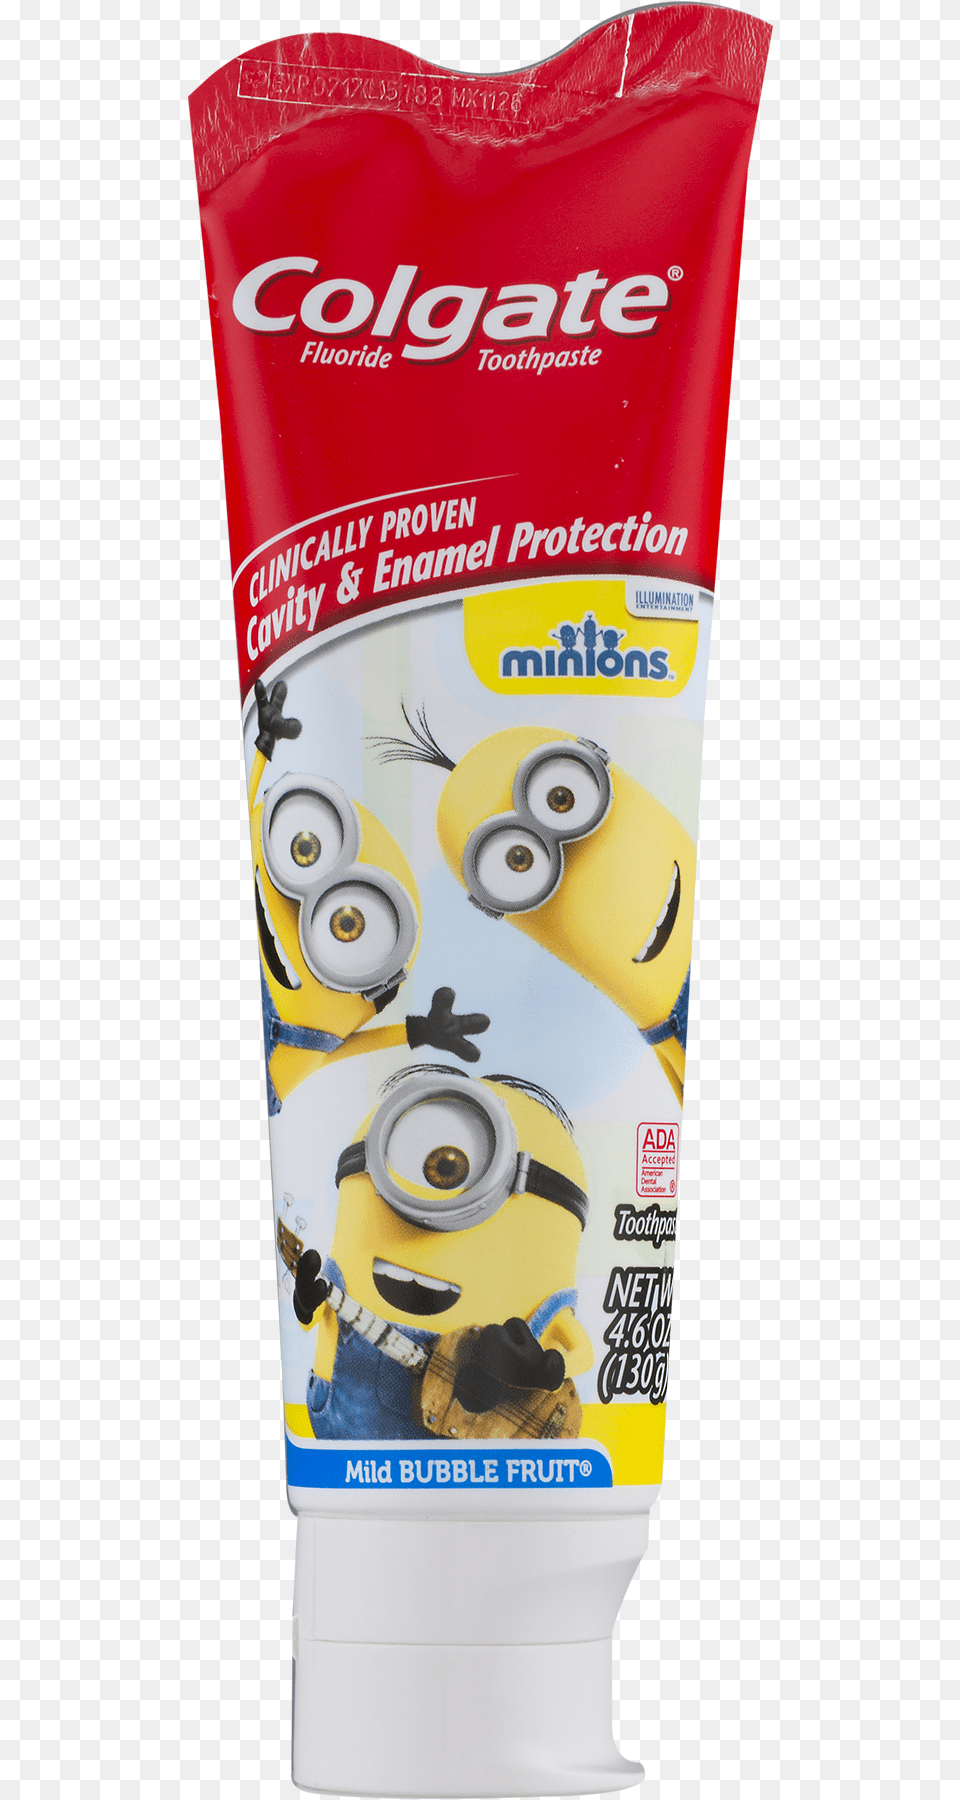 Colgate Minions Toothpaste, Bottle, Cosmetics, Sunscreen, Toy Free Transparent Png